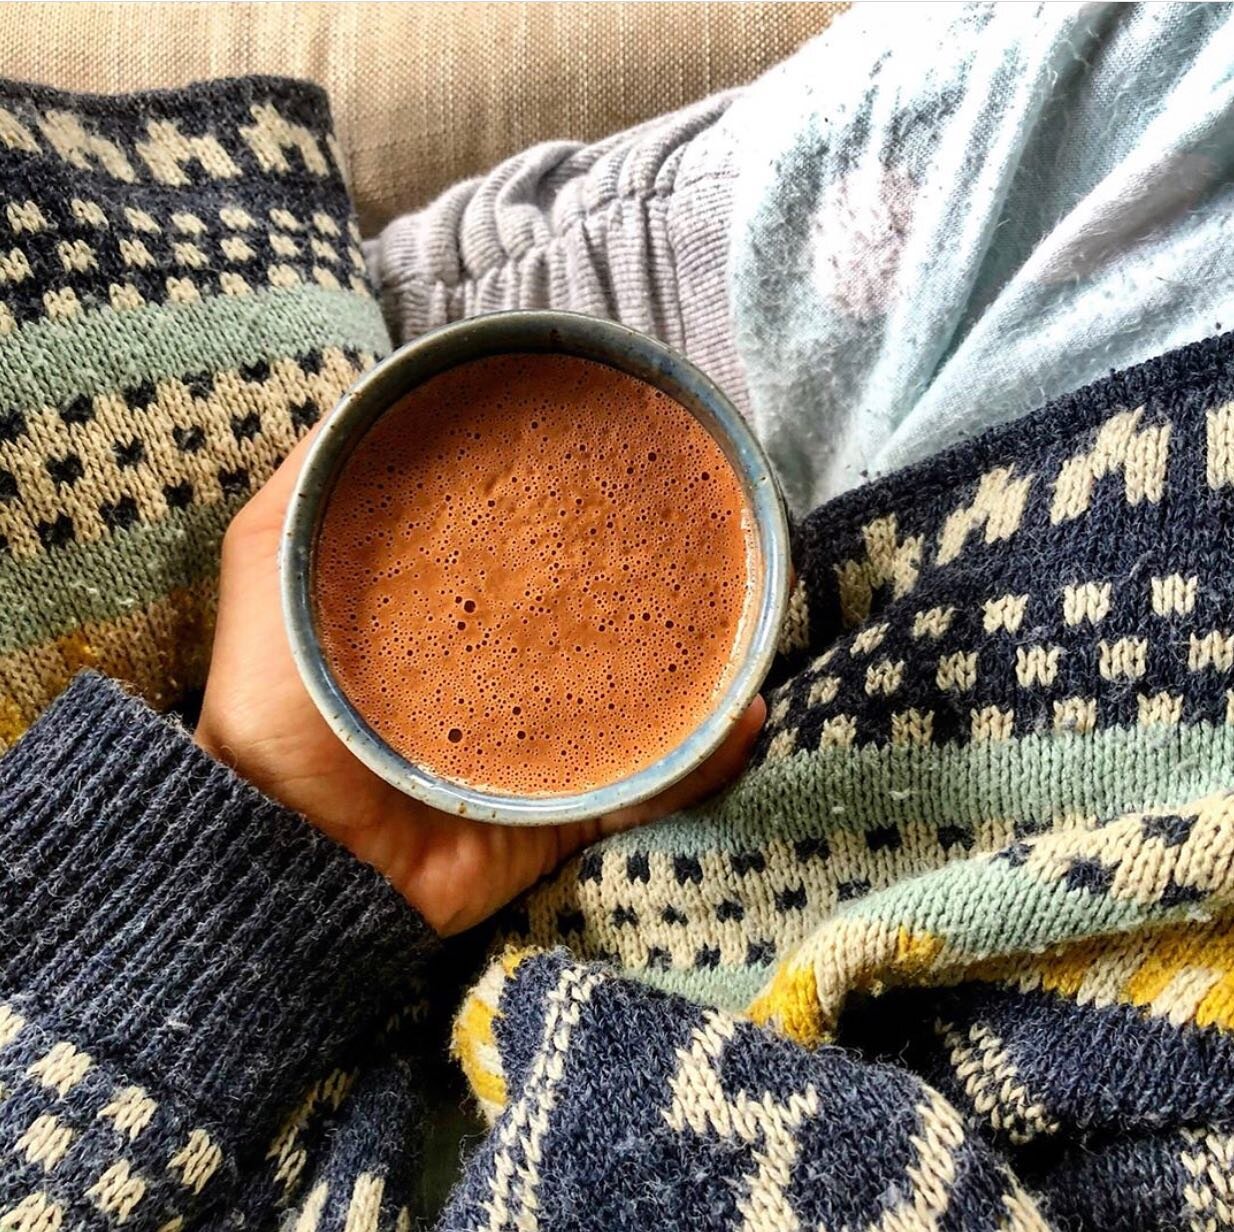 Missing your morning cup of coffee? While caffeine consumption when you are TTC, pregnant or postpartum is safe in small doses - plenty of folks prefer to forgo it entirely. Hot cacao can be a great alternative or supplement to your morning routine w